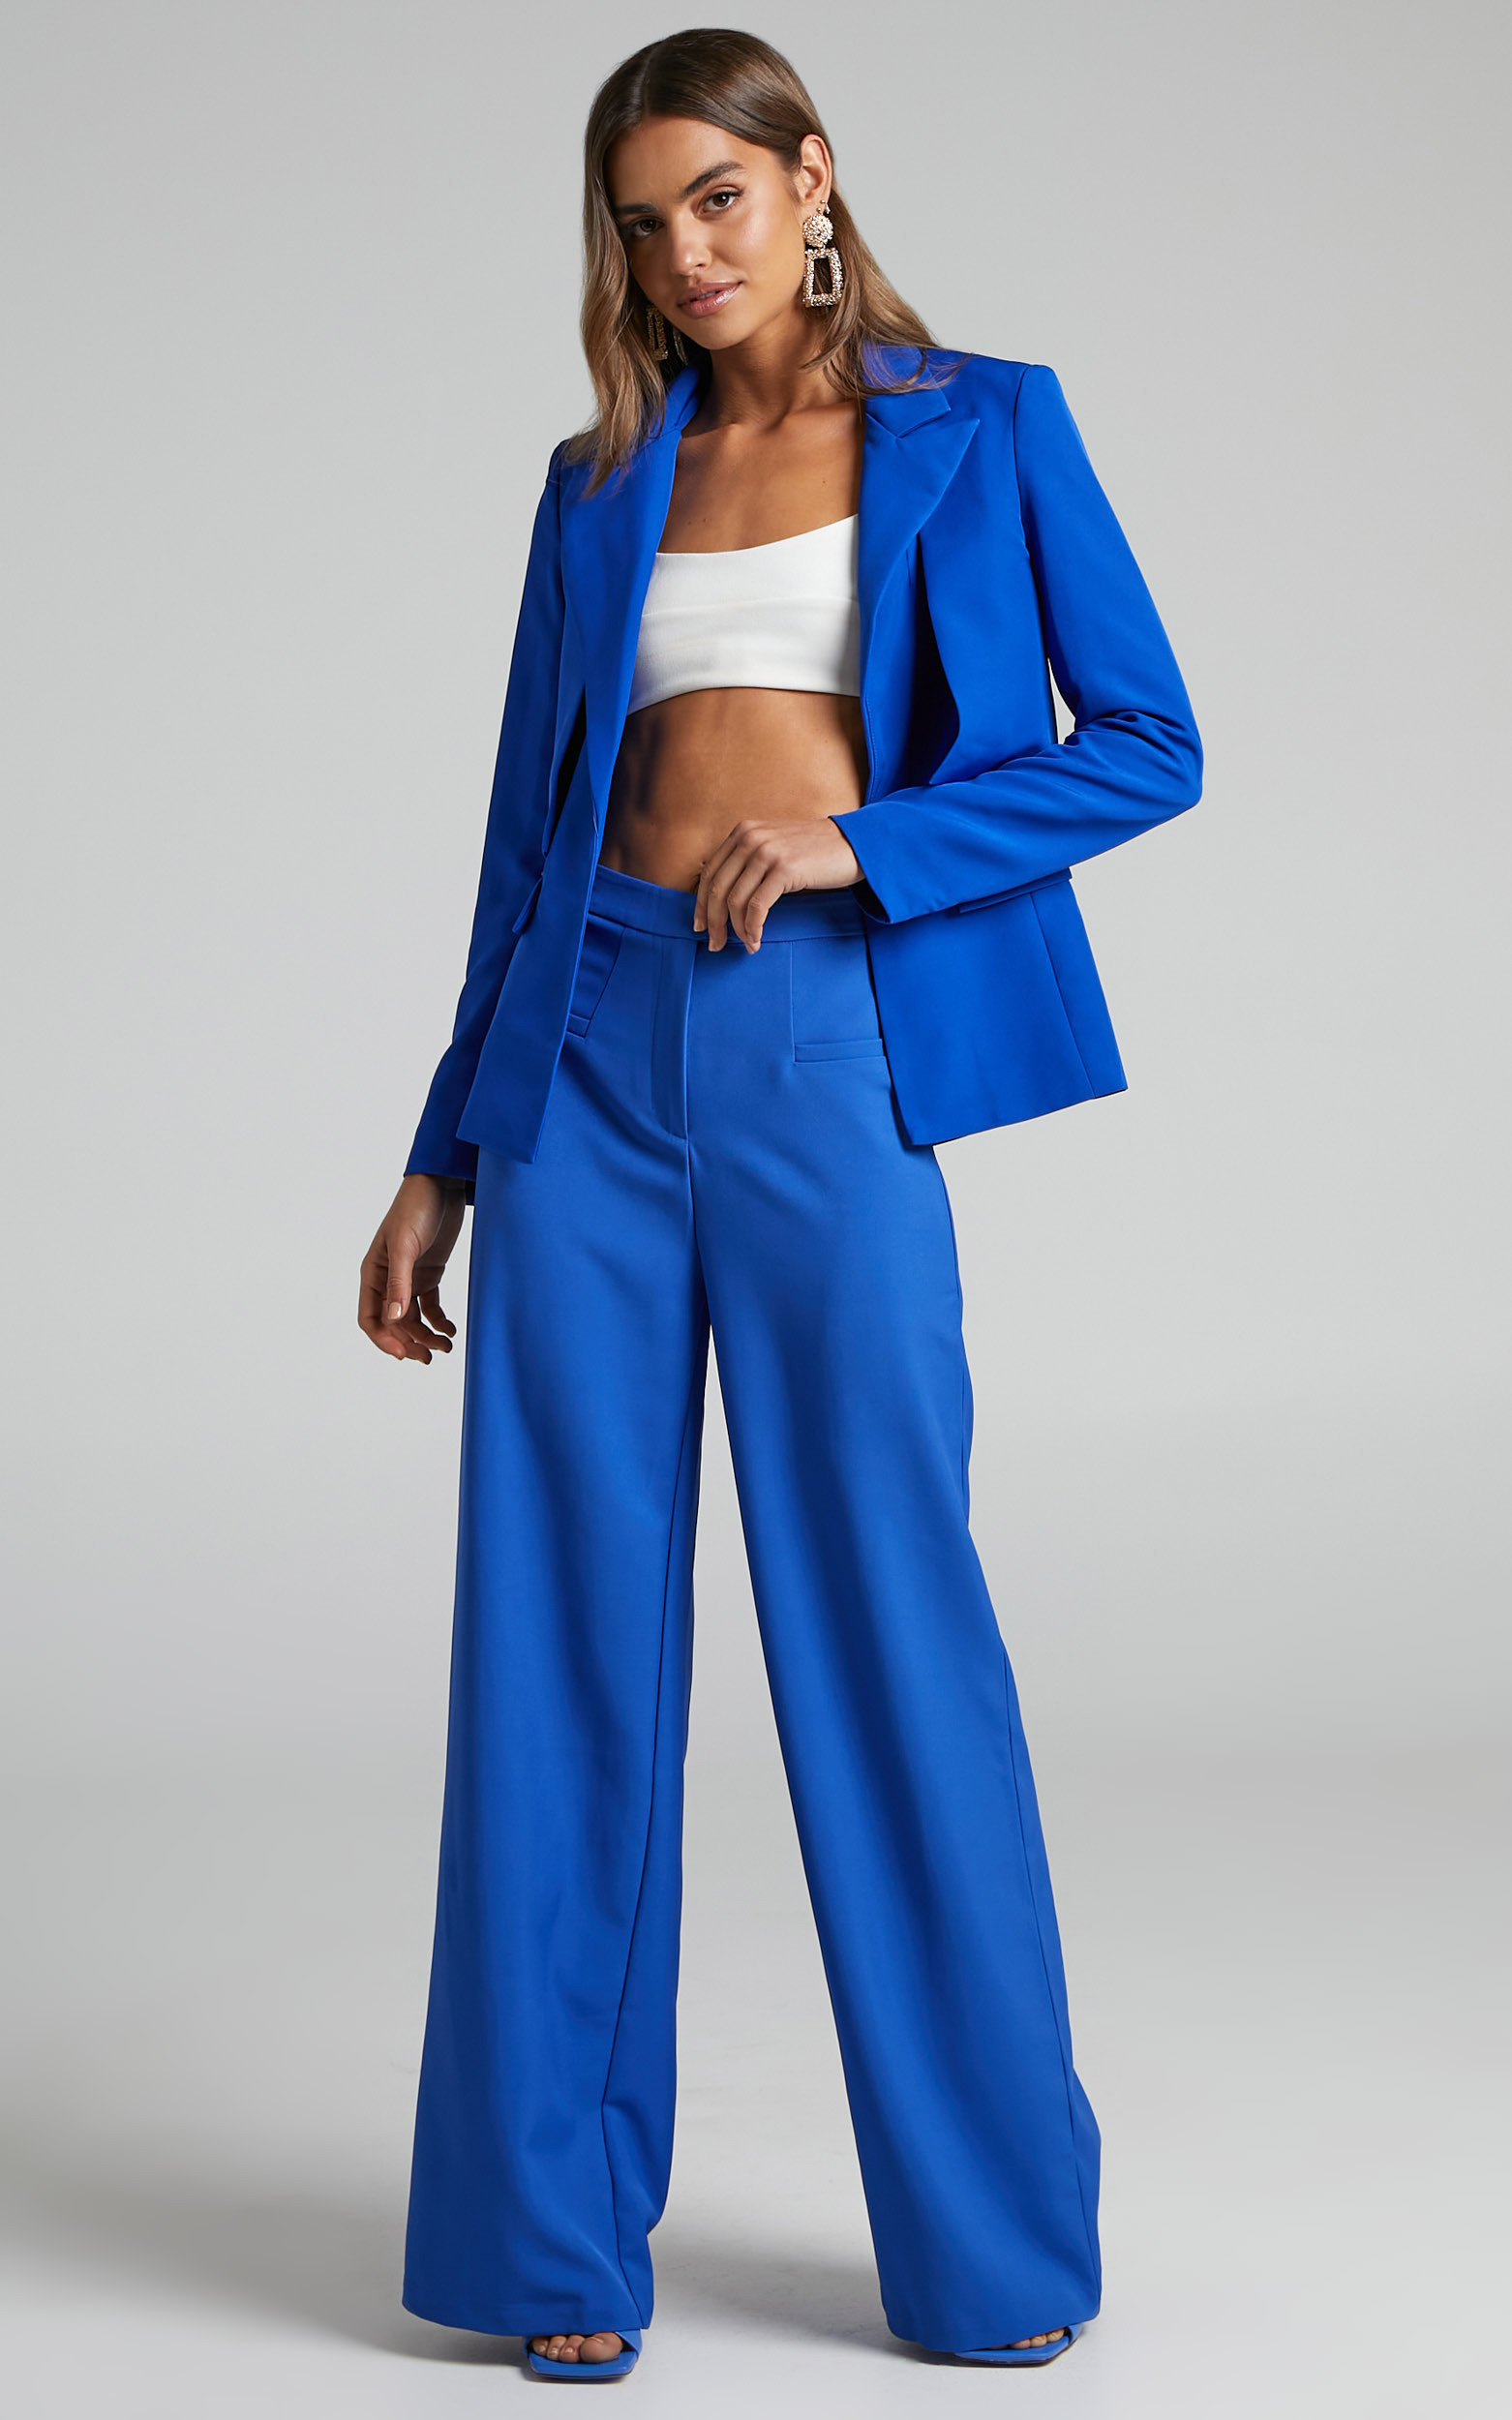 Jaxine - High Waisted Tailored Wide Leg Trousers in Cobalt - 04, BLU1, hi-res image number null